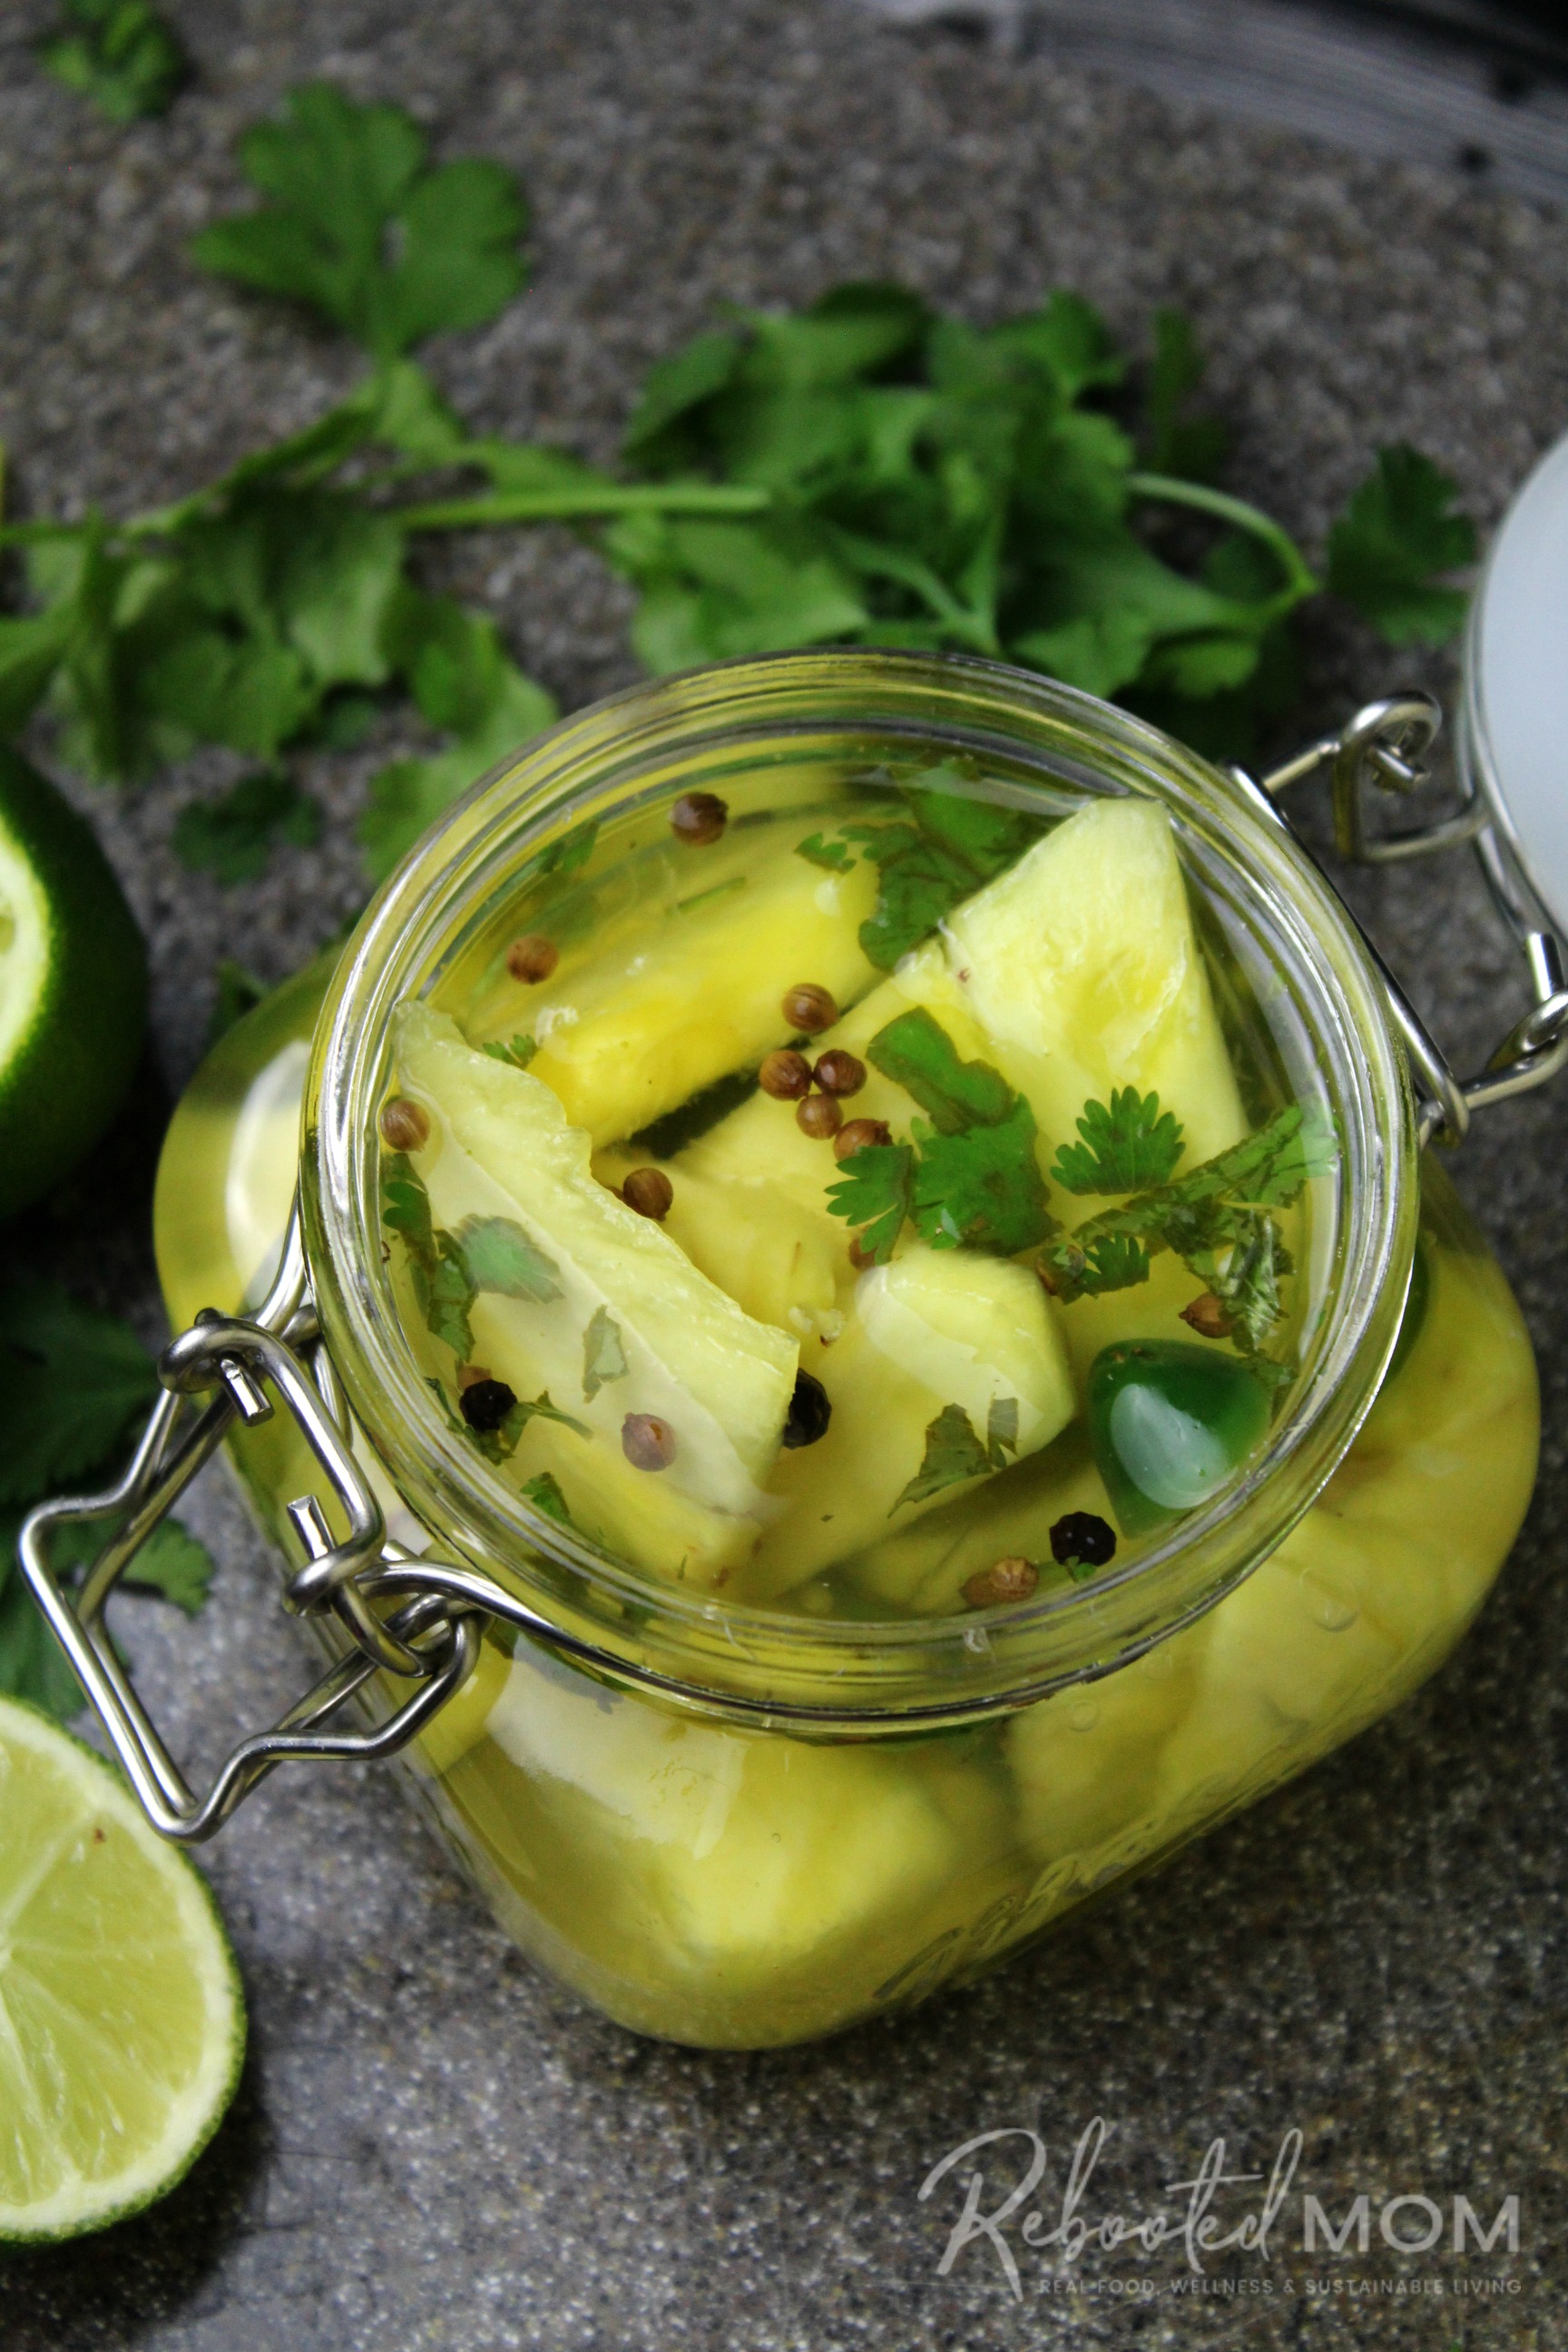 Spicy Pickled Pineapple in a jar